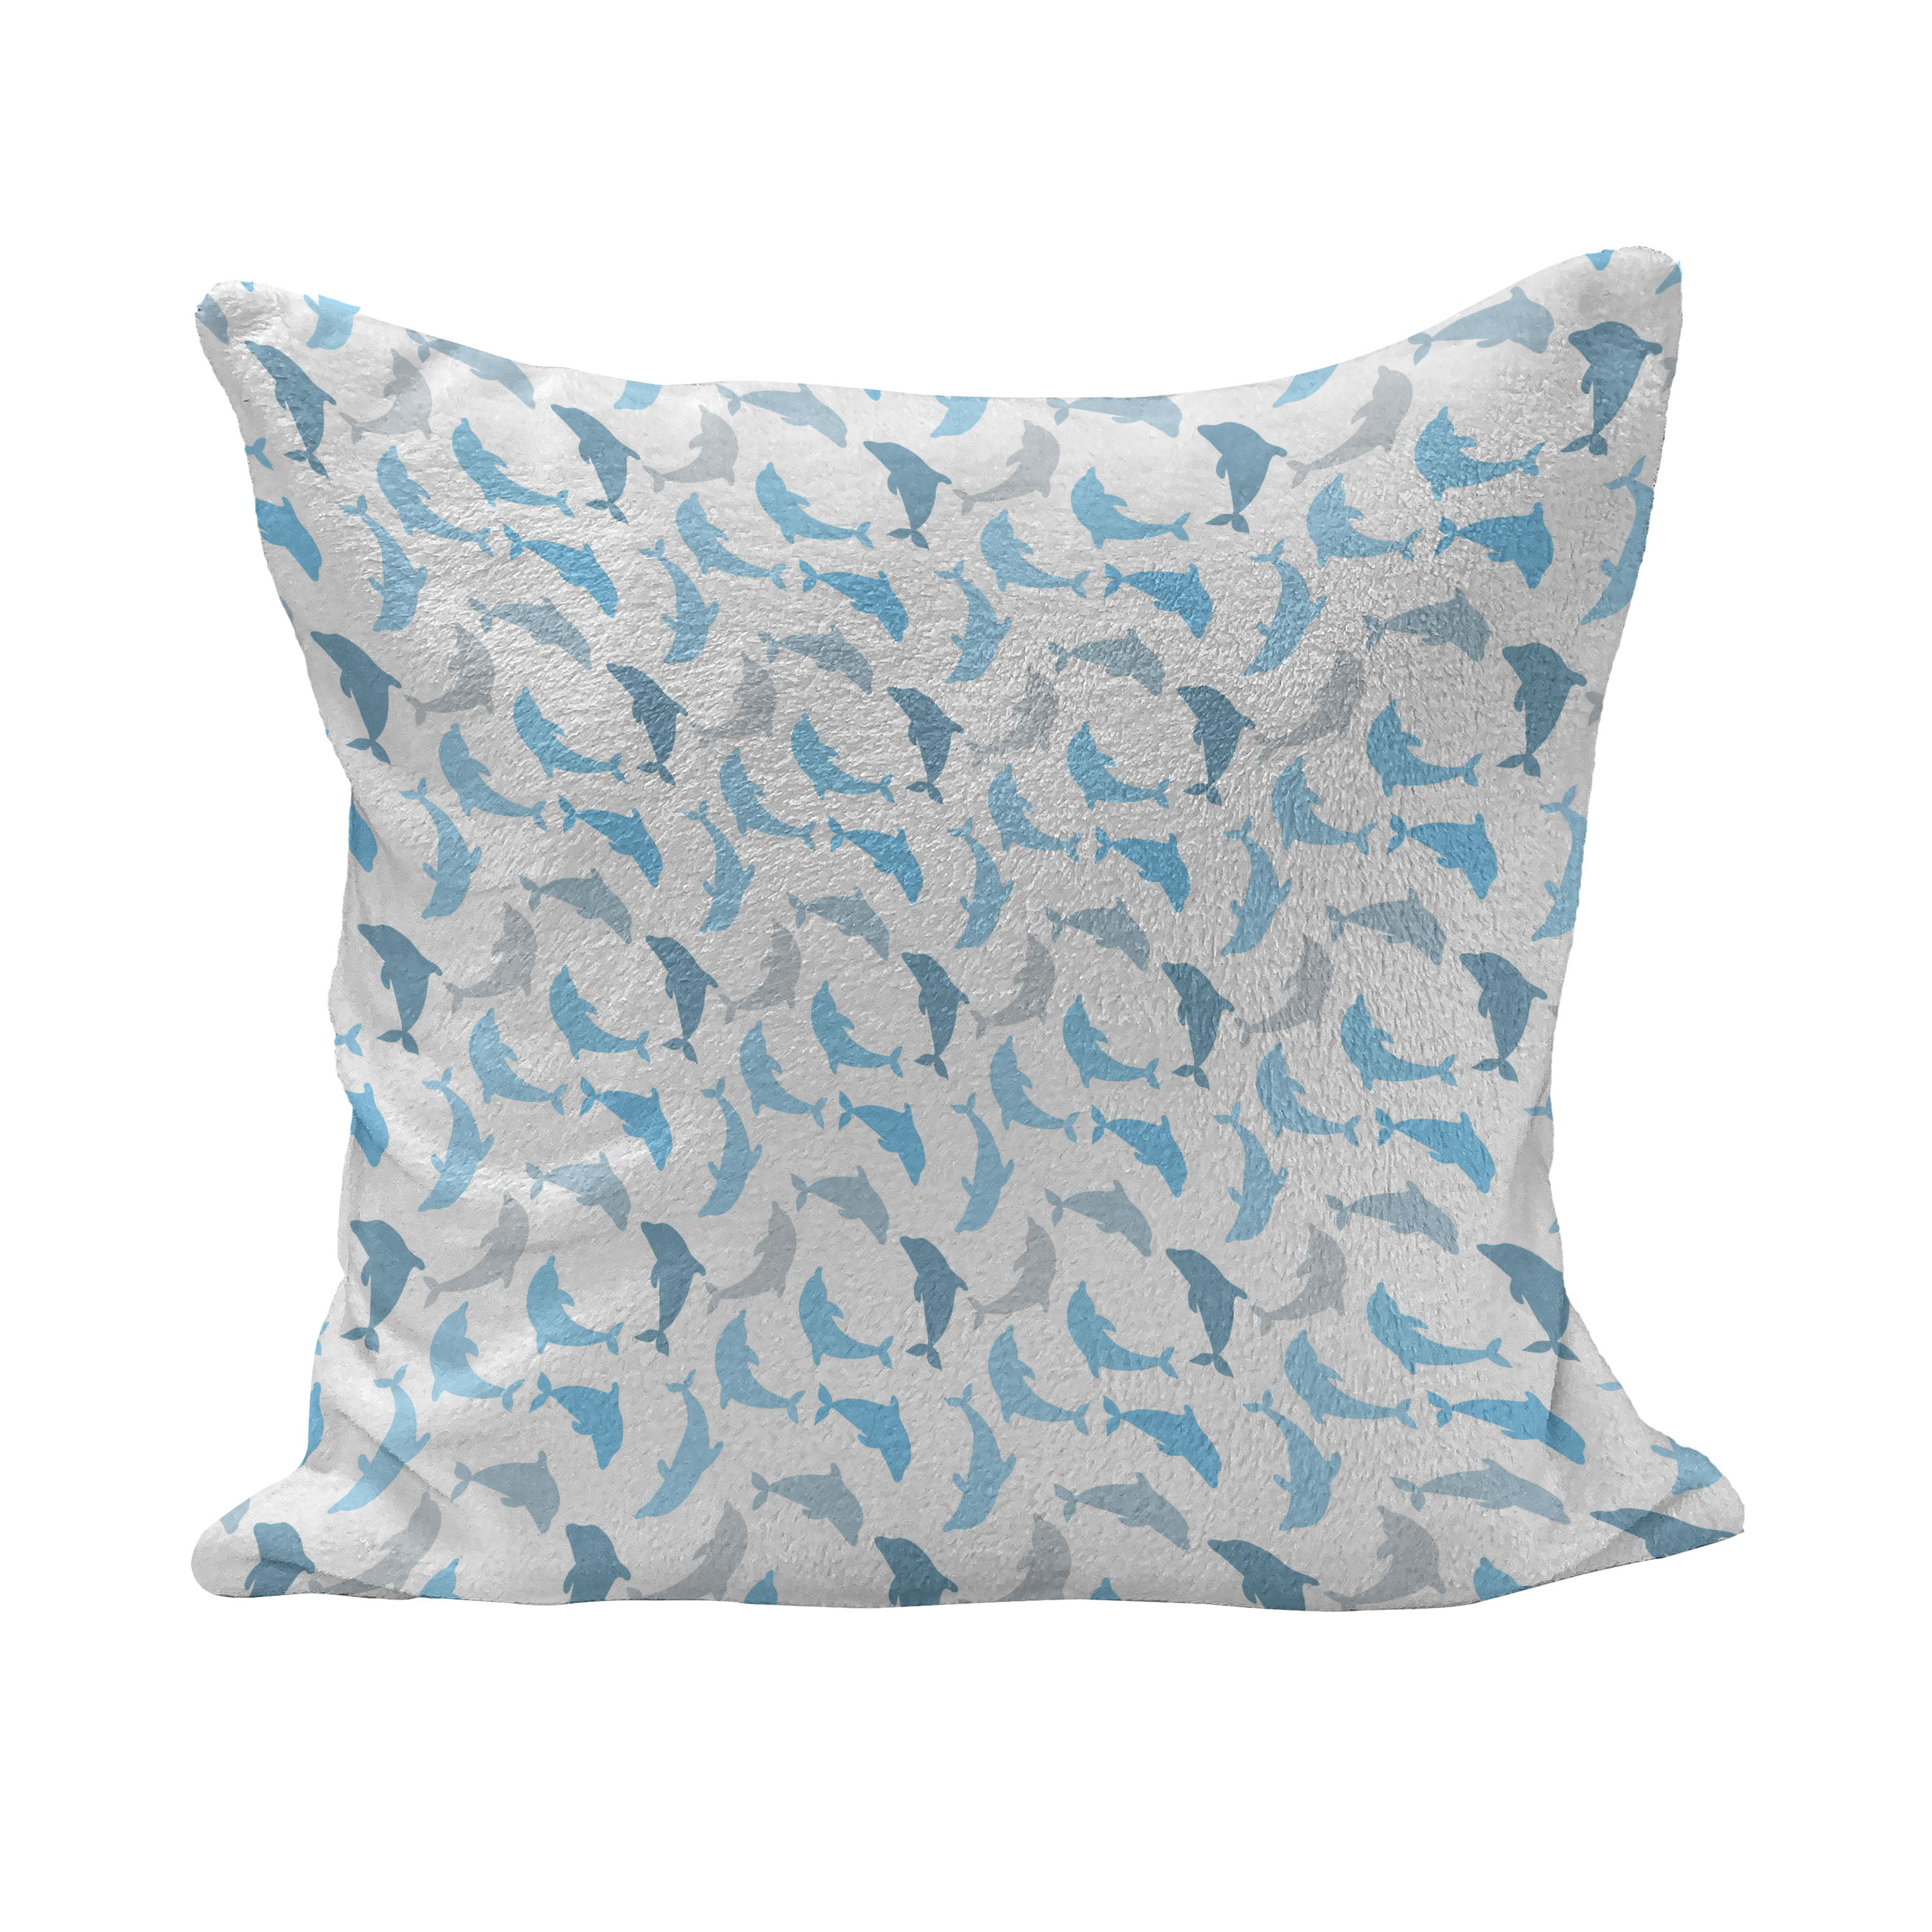 Decorative Square Accent Pillow Case Turquoise Seafoam Aquatic Look Modern Sealife Marine Shells Stars AMD Fish Under The Ocean Modern Image 18 X 18 Ambesonne Ocean Throw Pillow Cushion Cover 